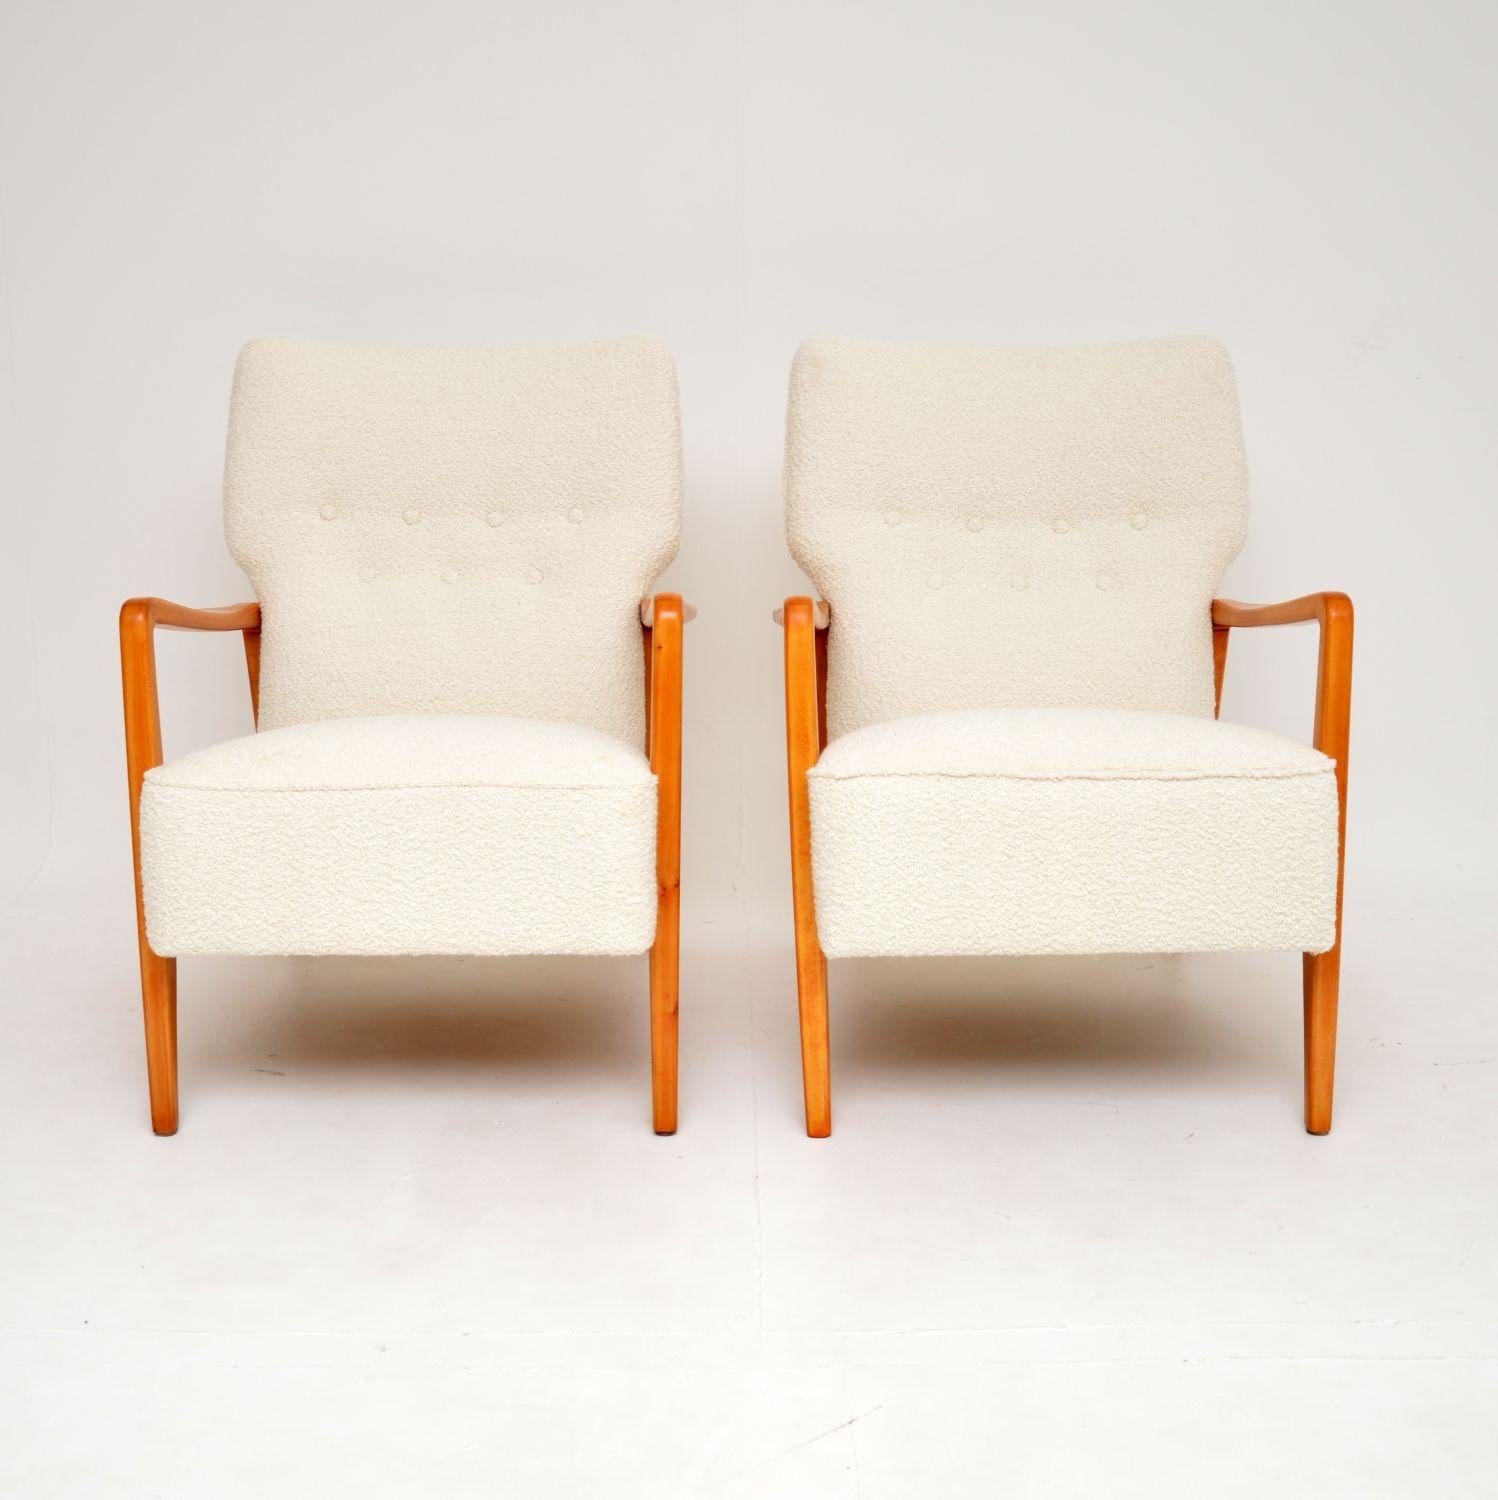 20th Century 1950's Pair of Swedish Armchairs by Folke Ohlsson for Dux